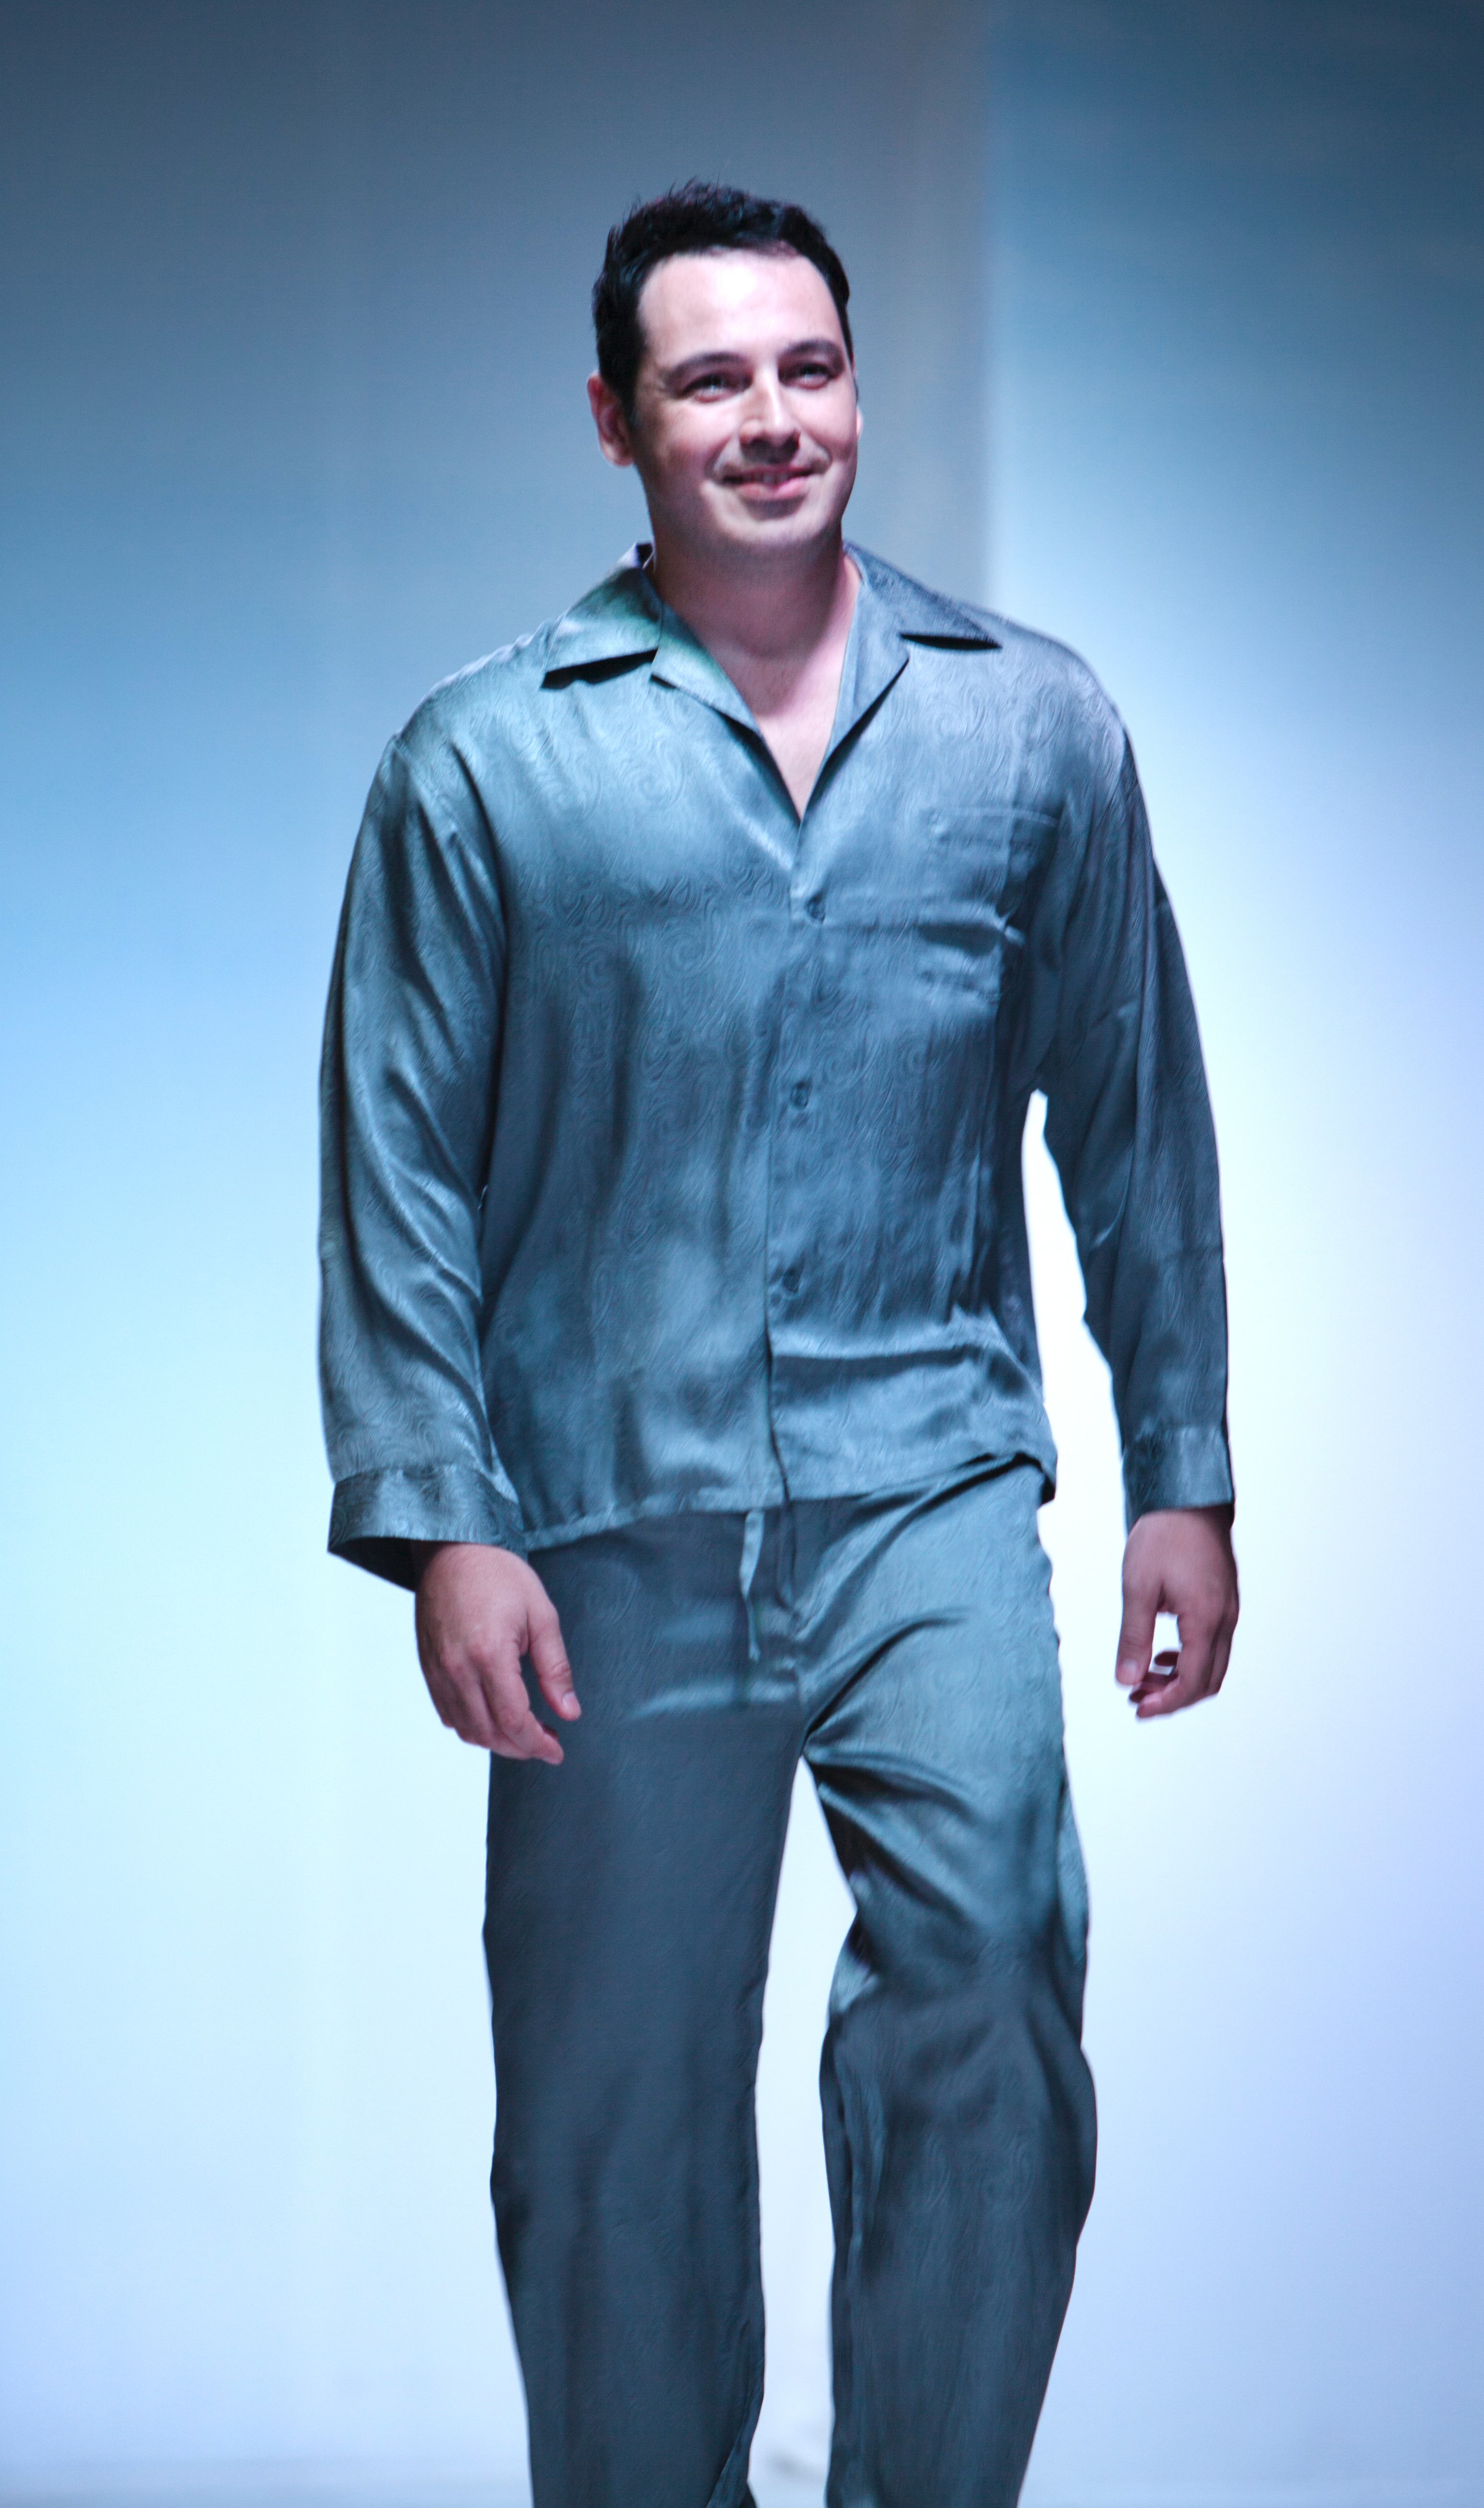 America’s Next Top Model, Raphael Dorval on the “Getting to Zero” fashion show runway wearing loungewear from UnderCover MensWear.com